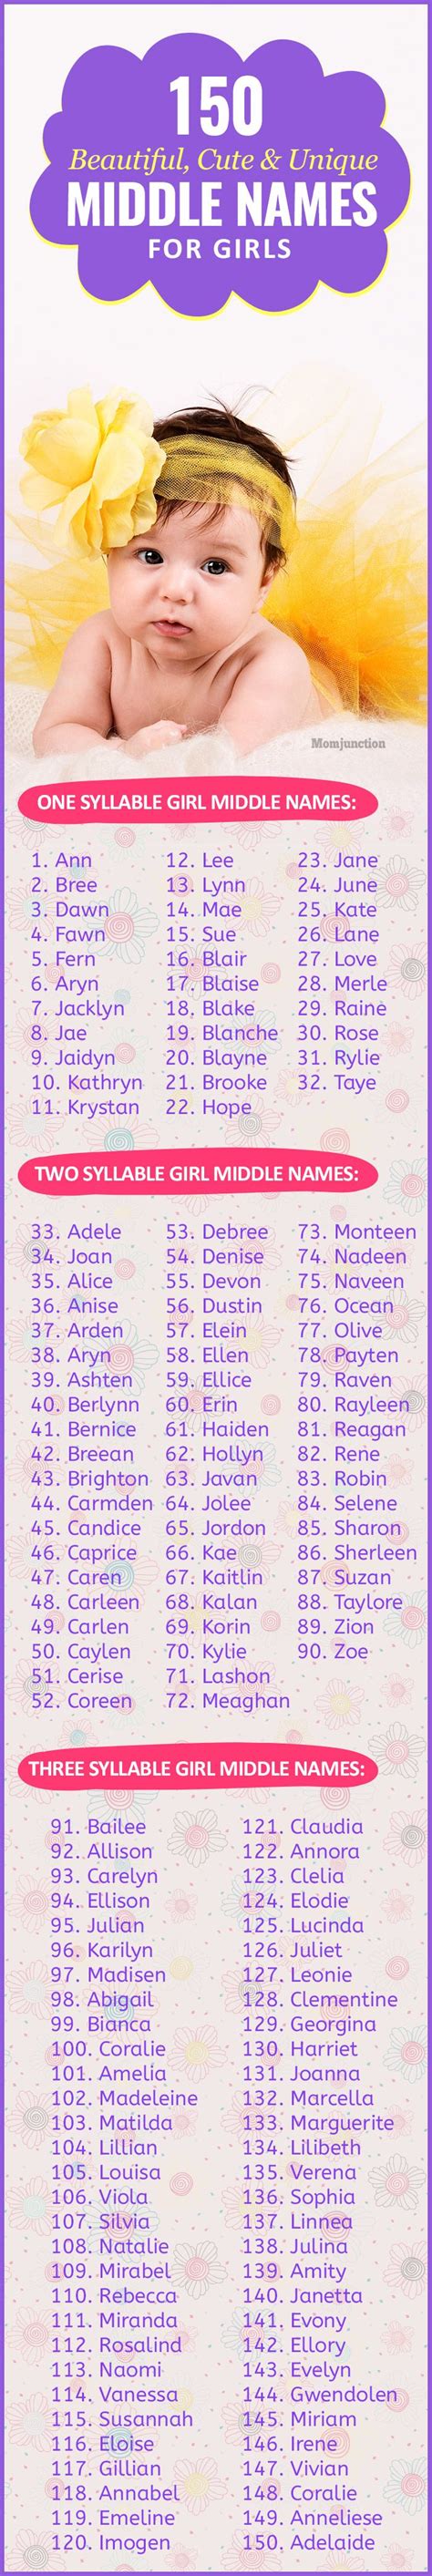 150 Beautiful Cute And Unique Middle Names For Girls In 2021 Middle